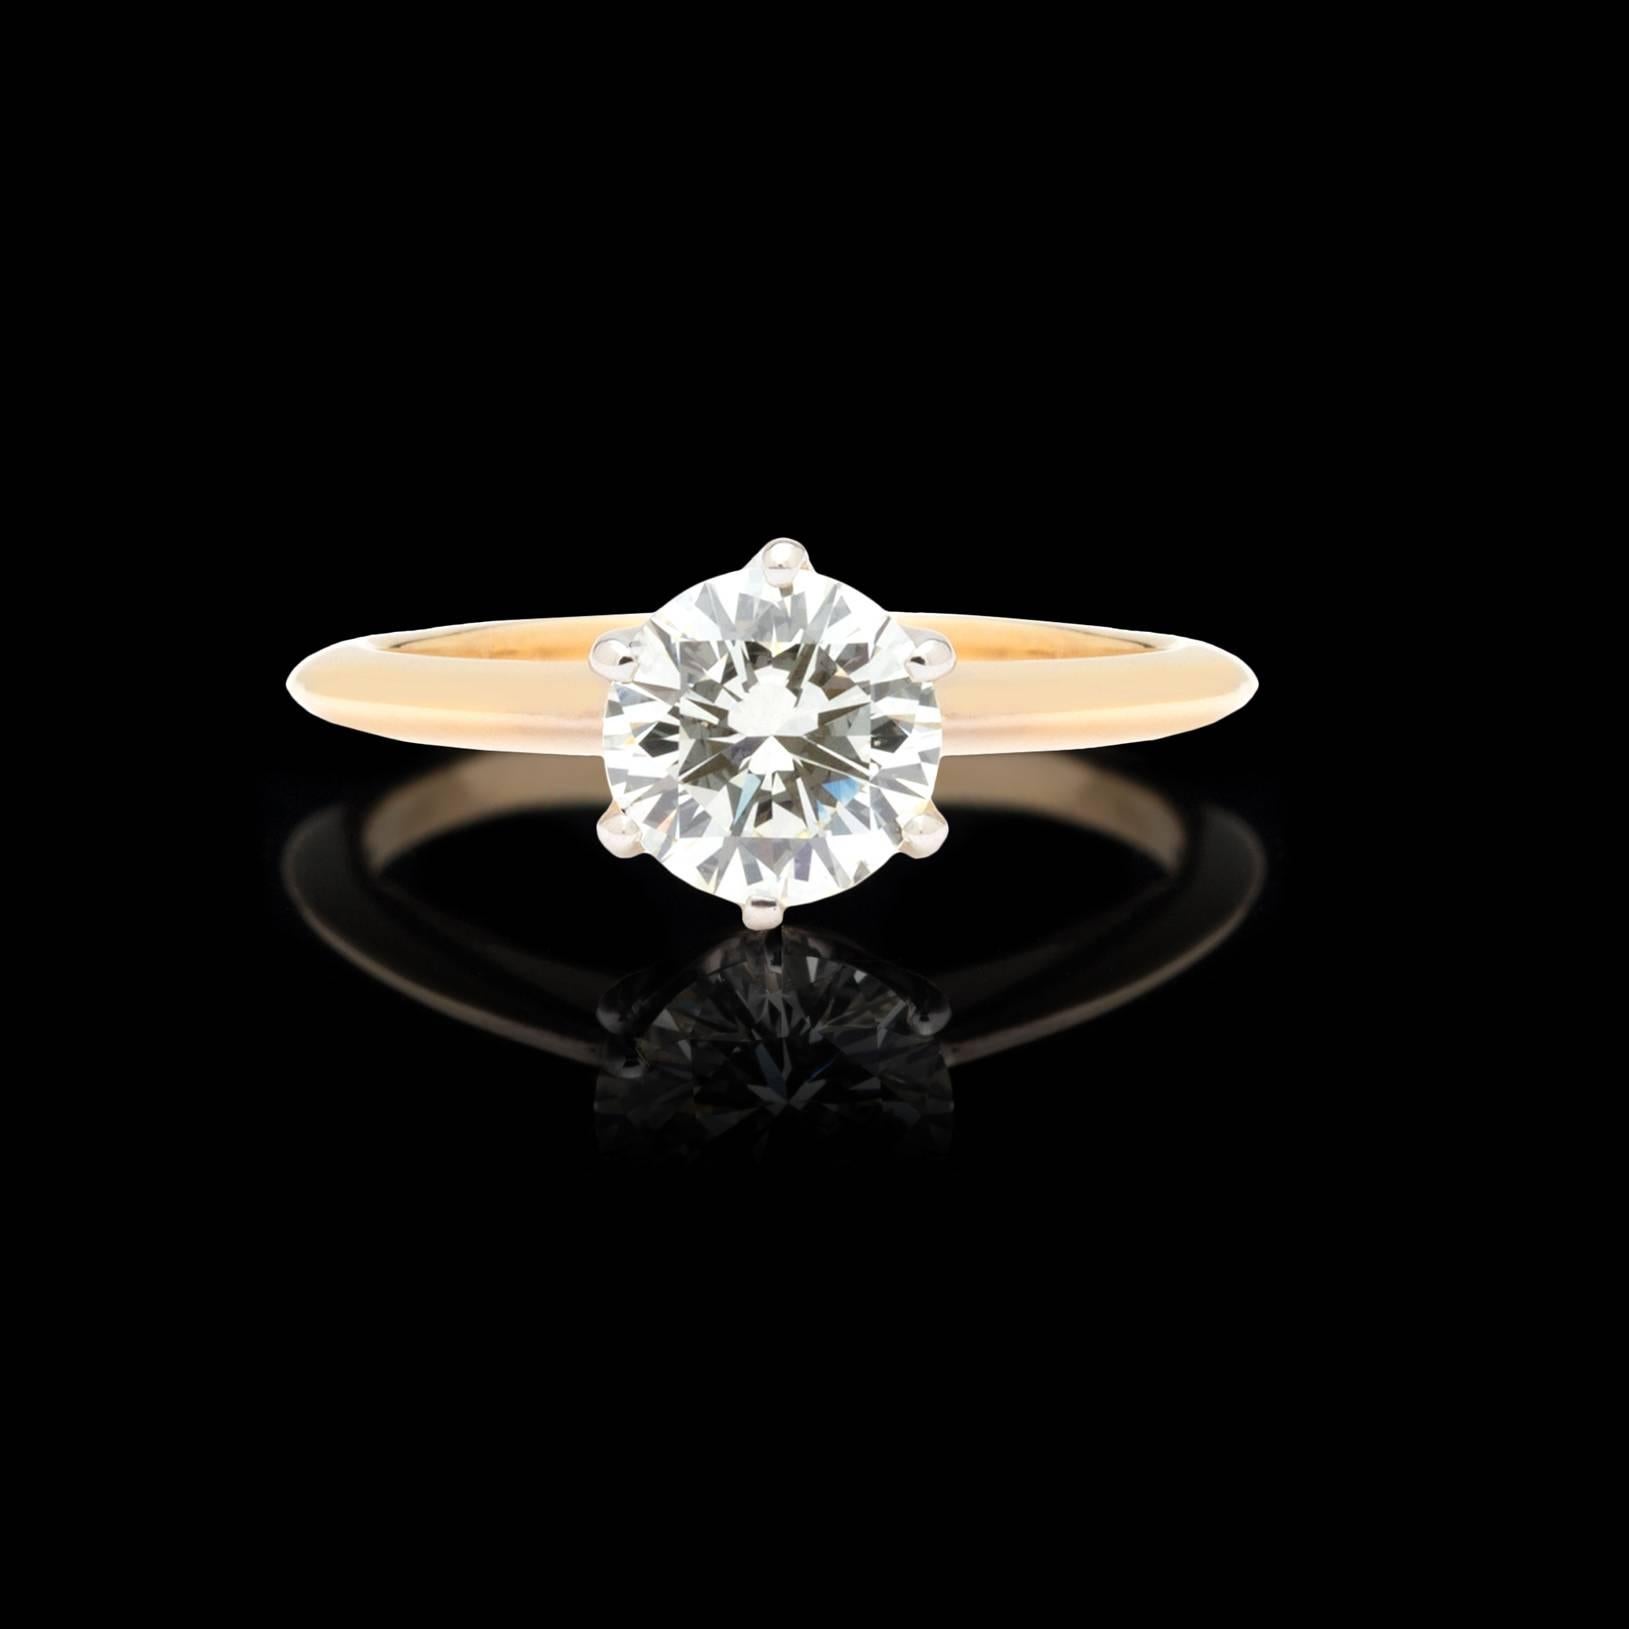 Classic solitaire diamond ring features a 1.04ct round brilliant diamond on a Tiffany style 18k gold band. The diamond was graded K color, VS2 clarity and very good cut by the Gemological Institute of America. Report number 1192086339 is included.